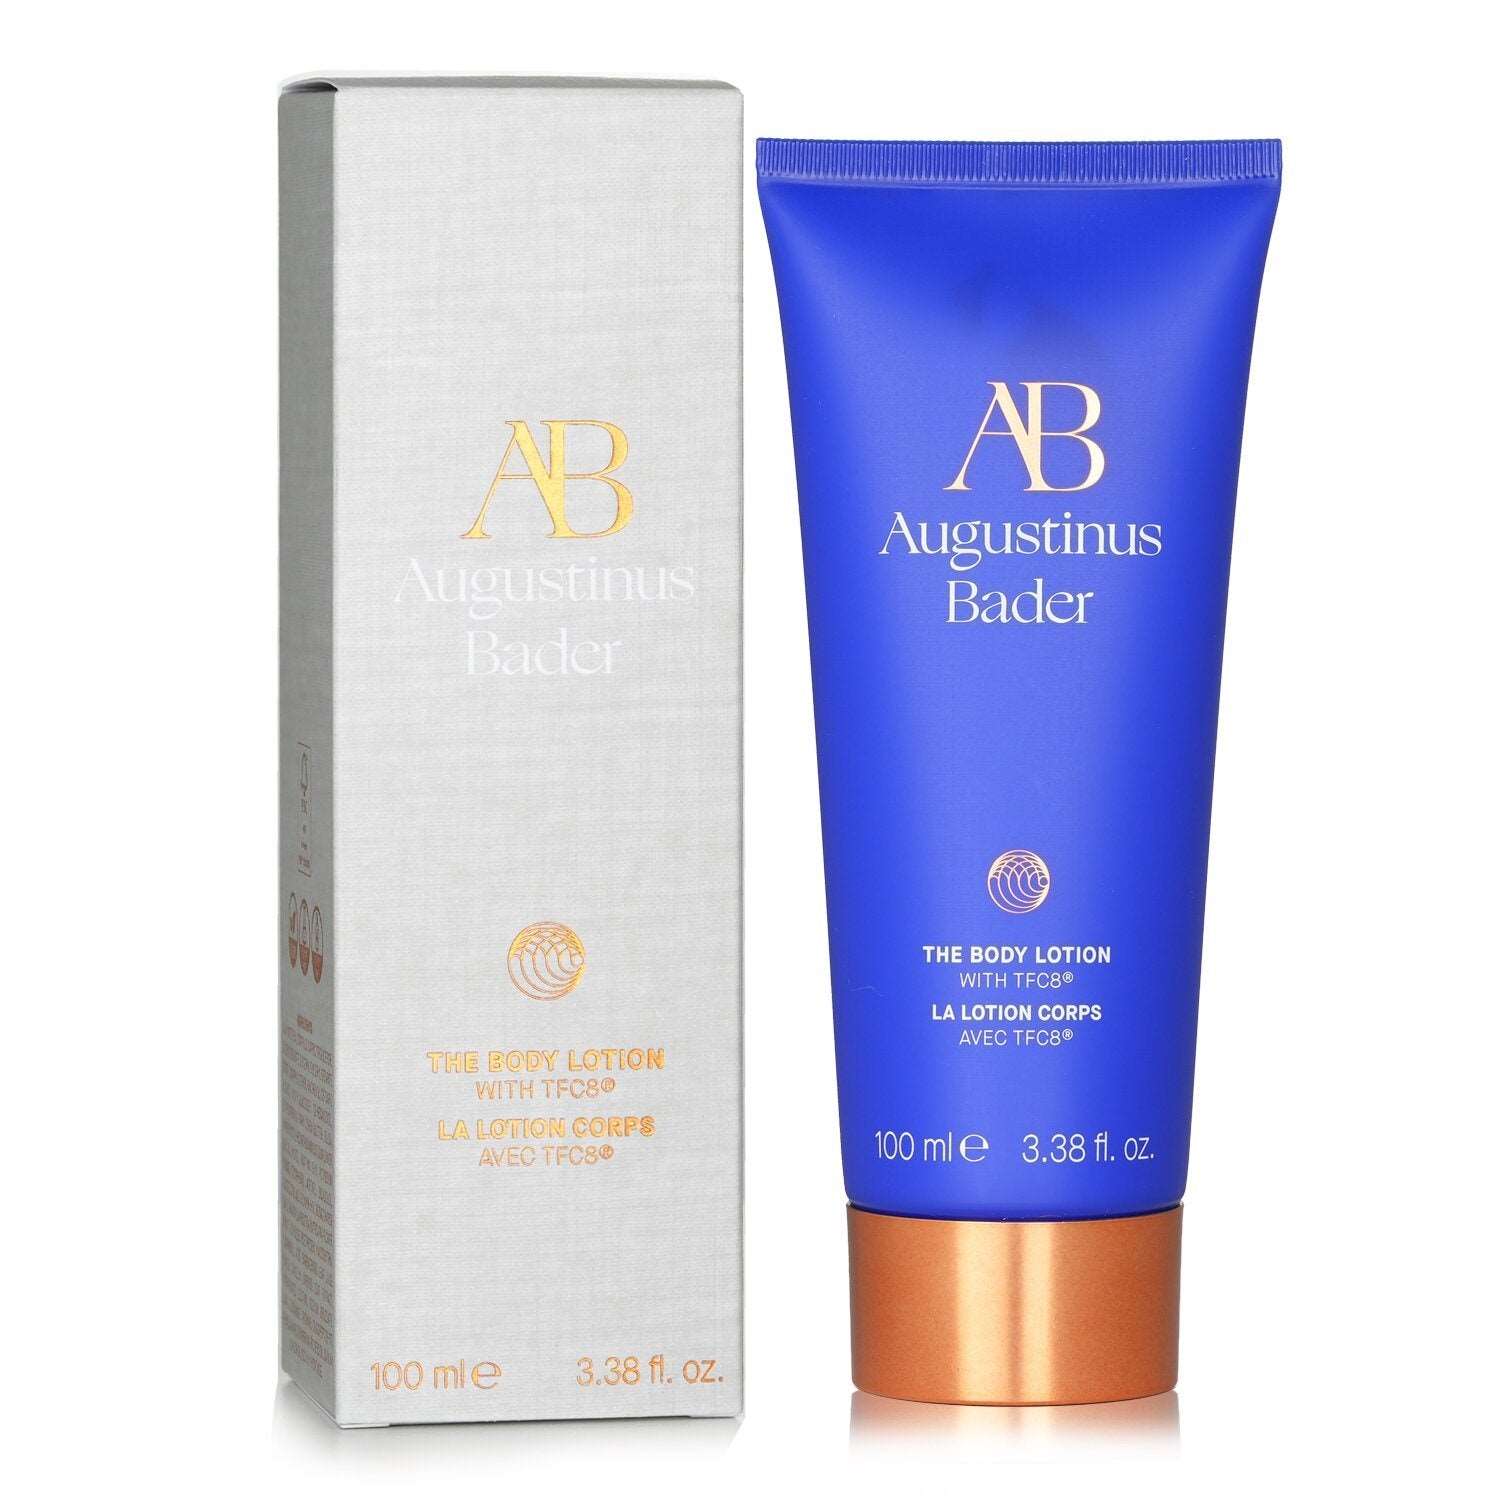 AUGUSTINUS BADER - The Body Lotion with TFC8 - 100ml/3.38oz 3P's Inclusive Beauty